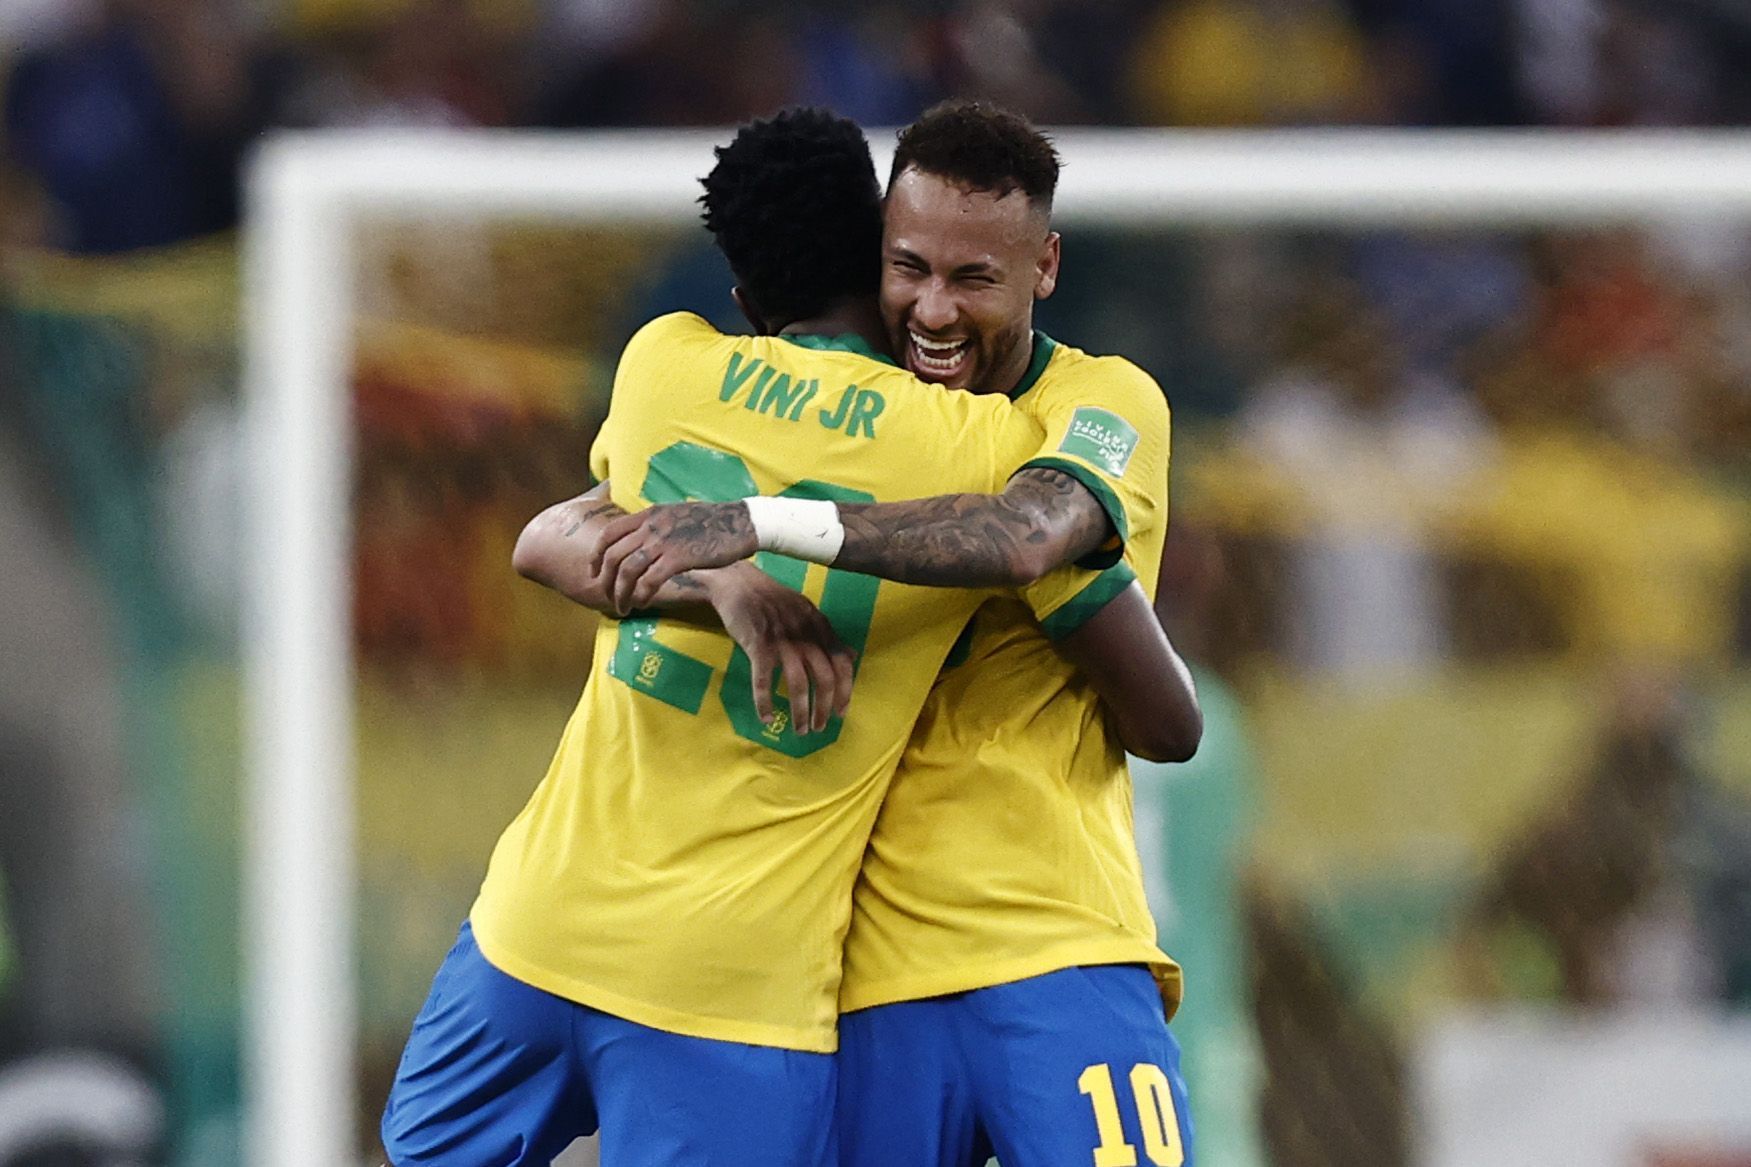 Brazil will be counting on the duo to step up for them at the World Cup later this year.